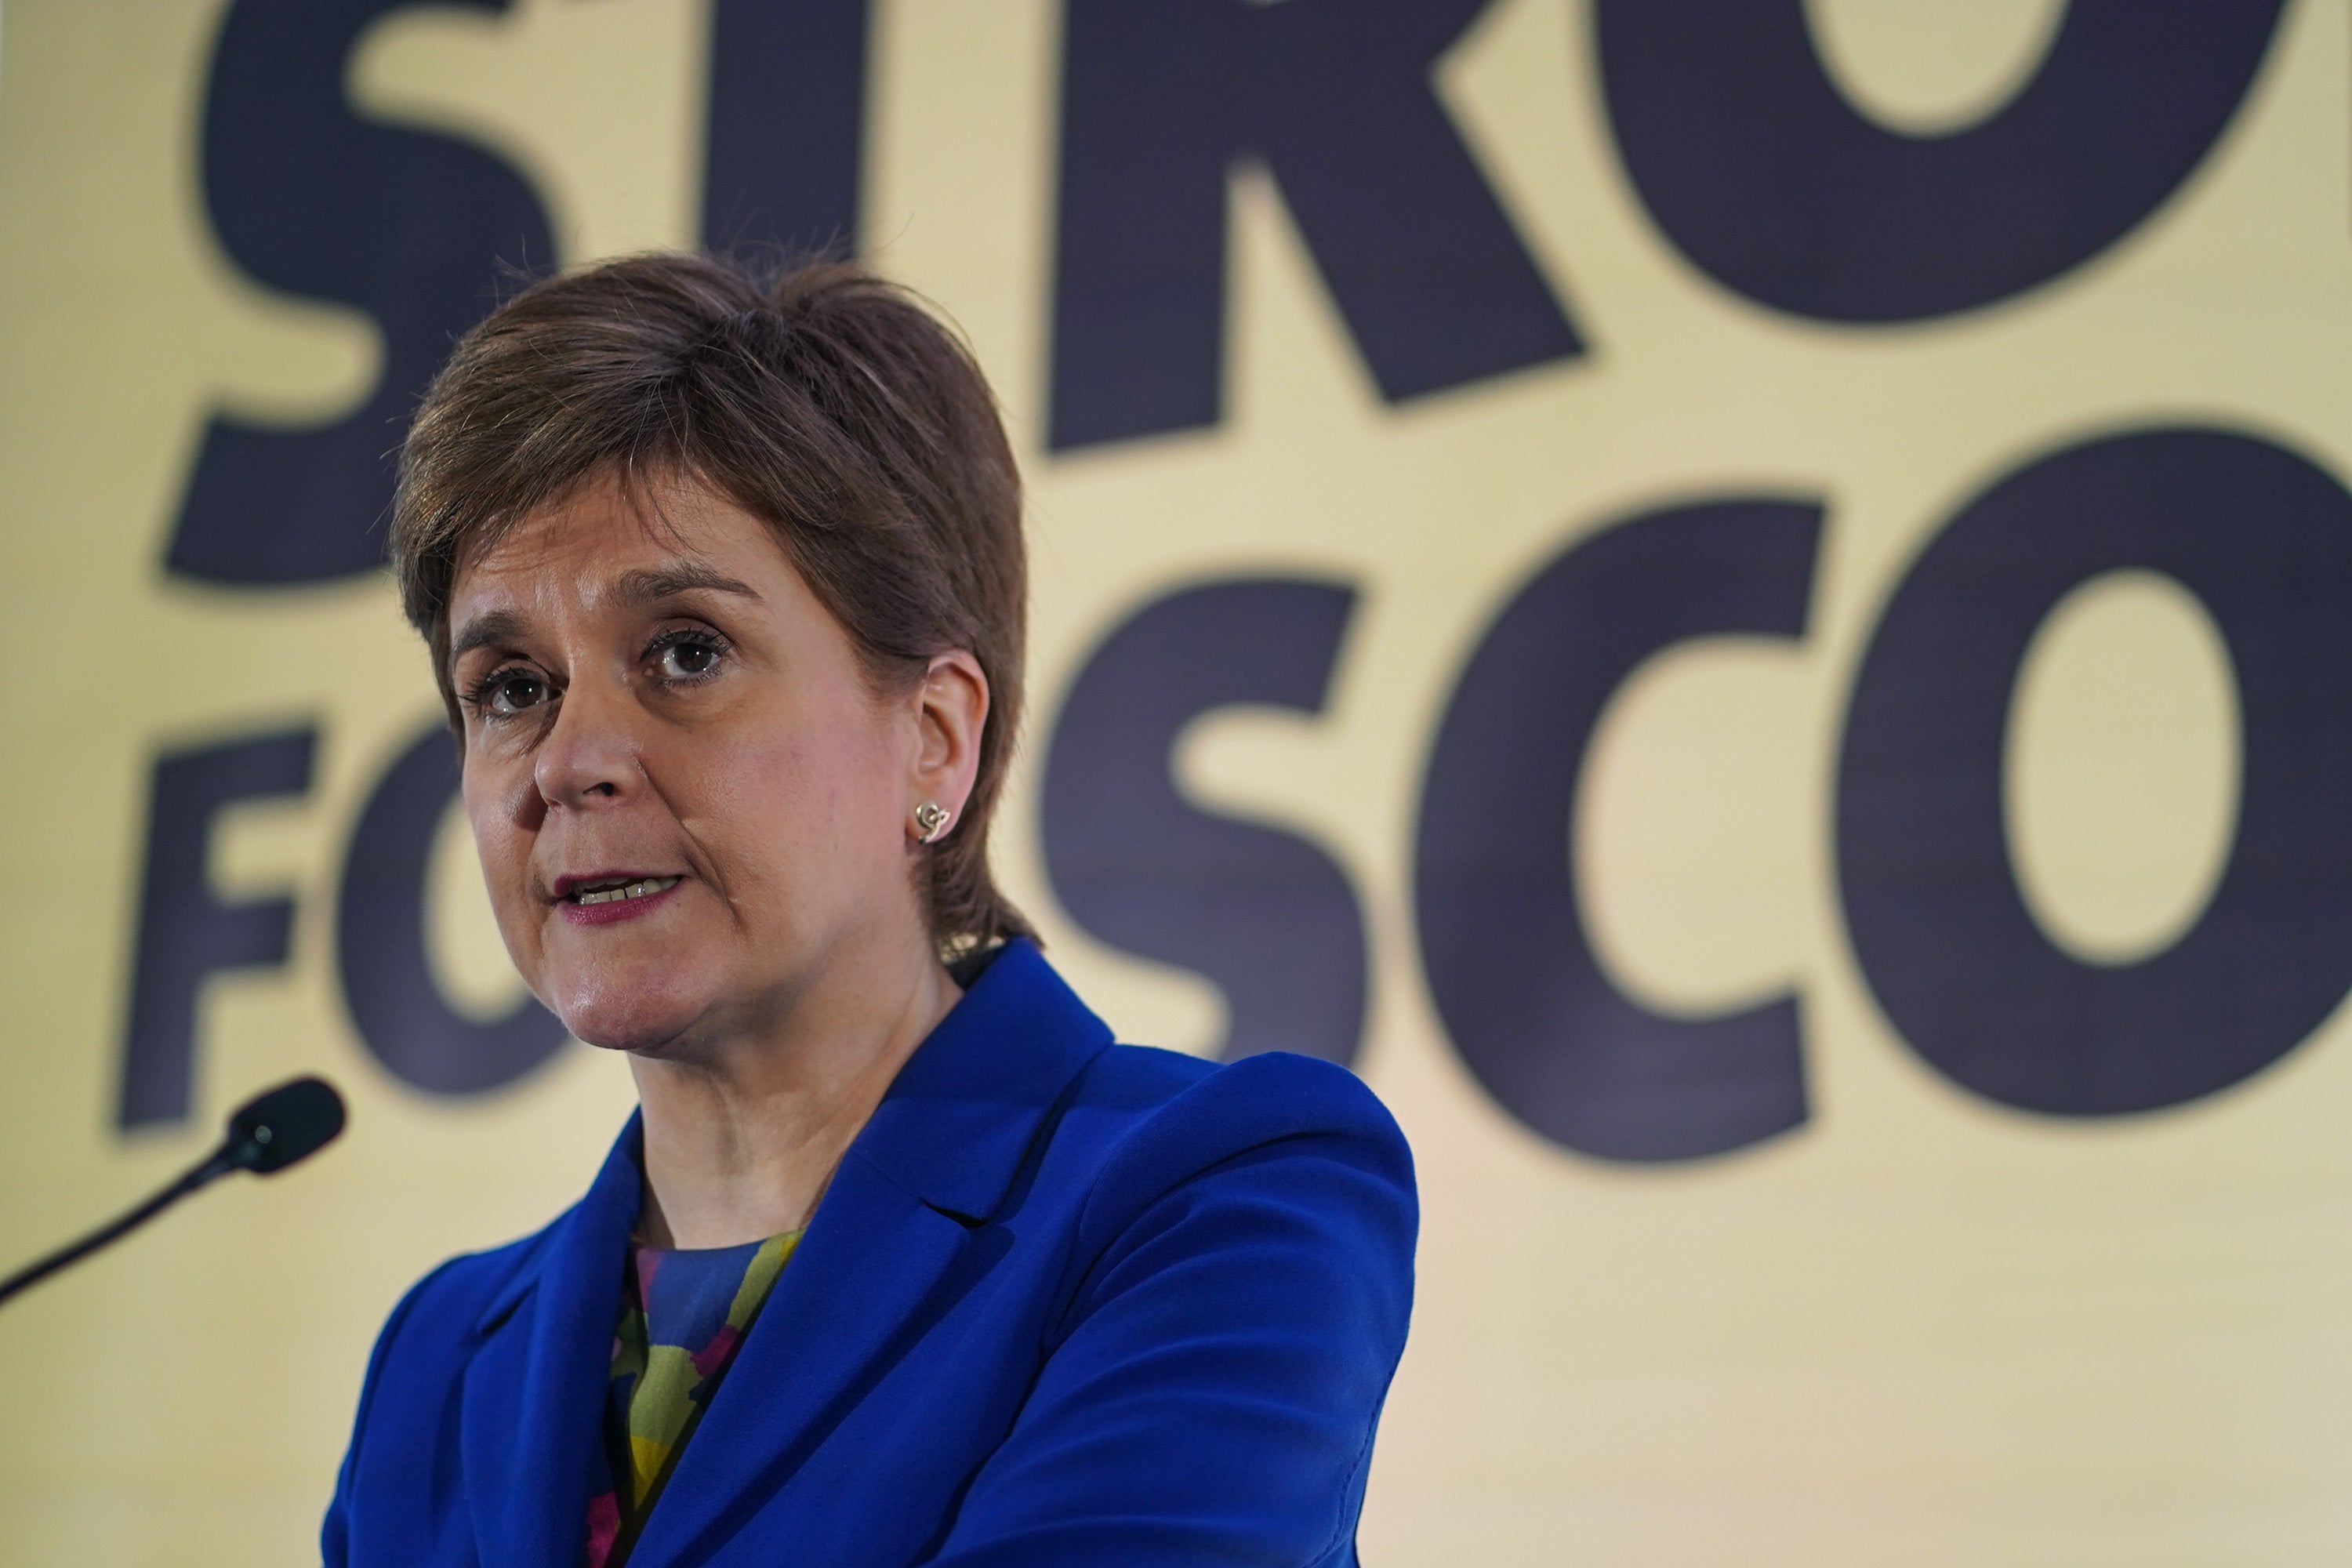 The Scottish independence issue has not gone away